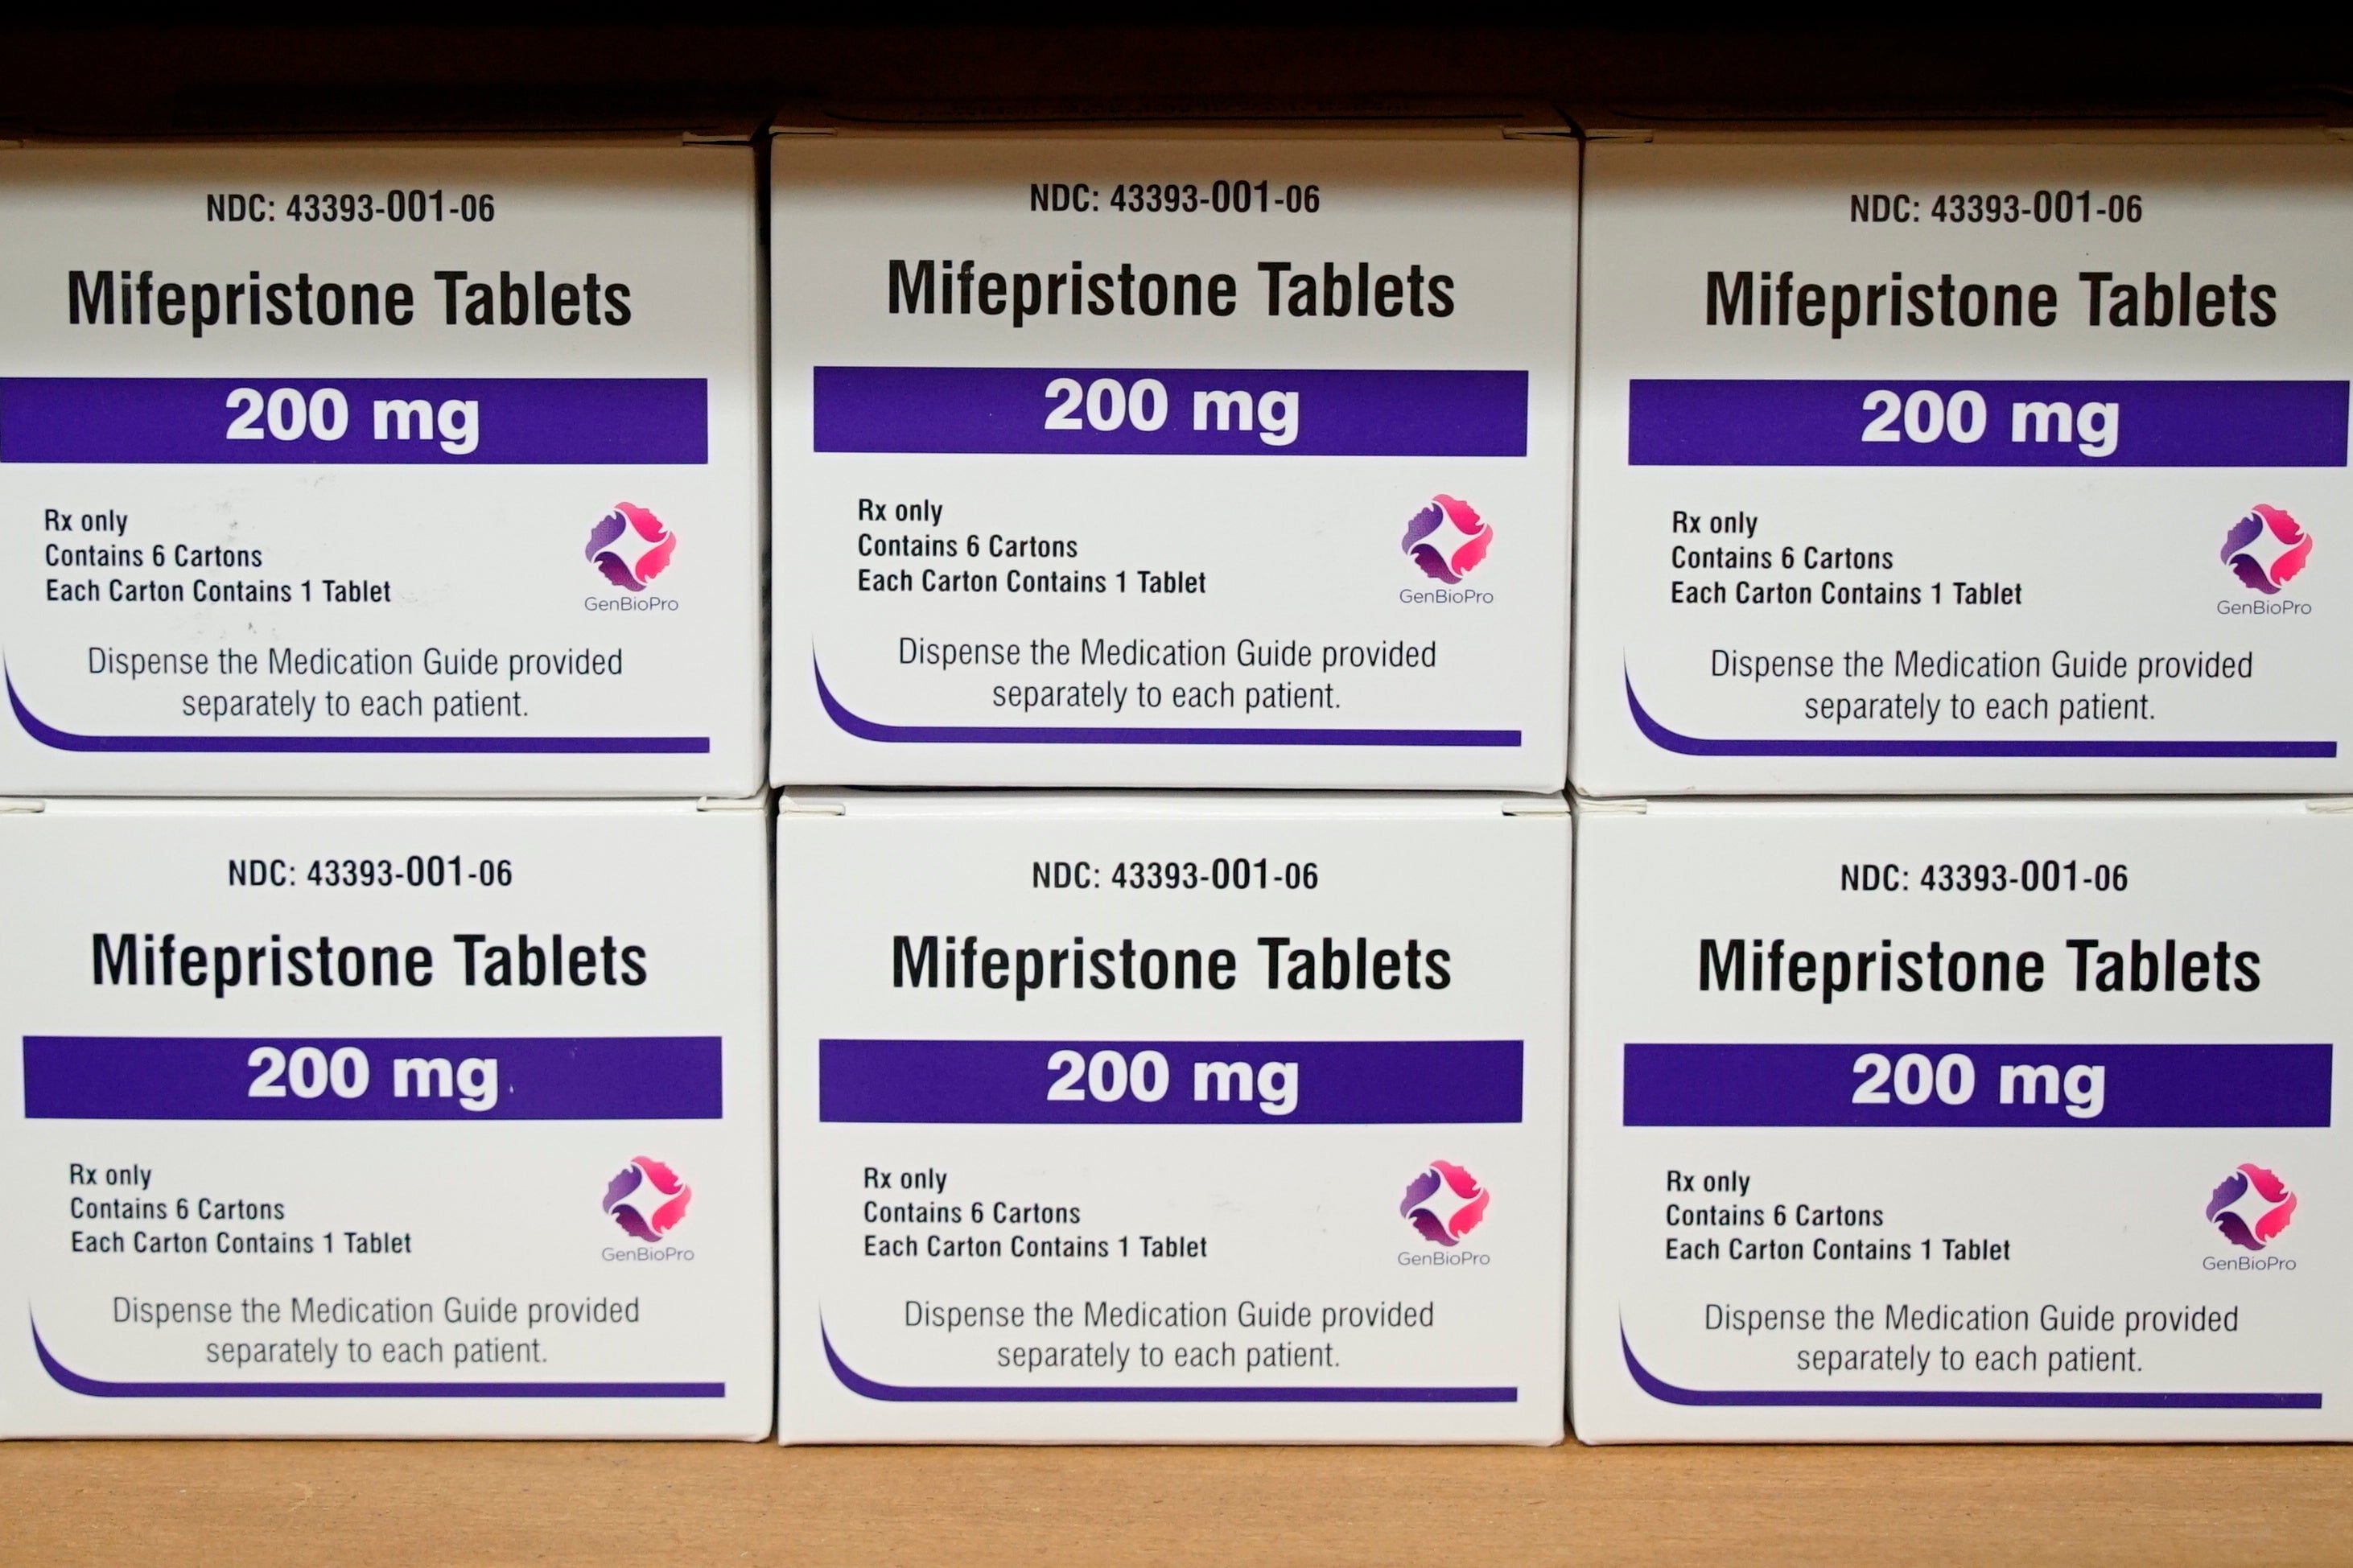 Mifepristone is used for abortions conducted in under 8 weeks’ gestation